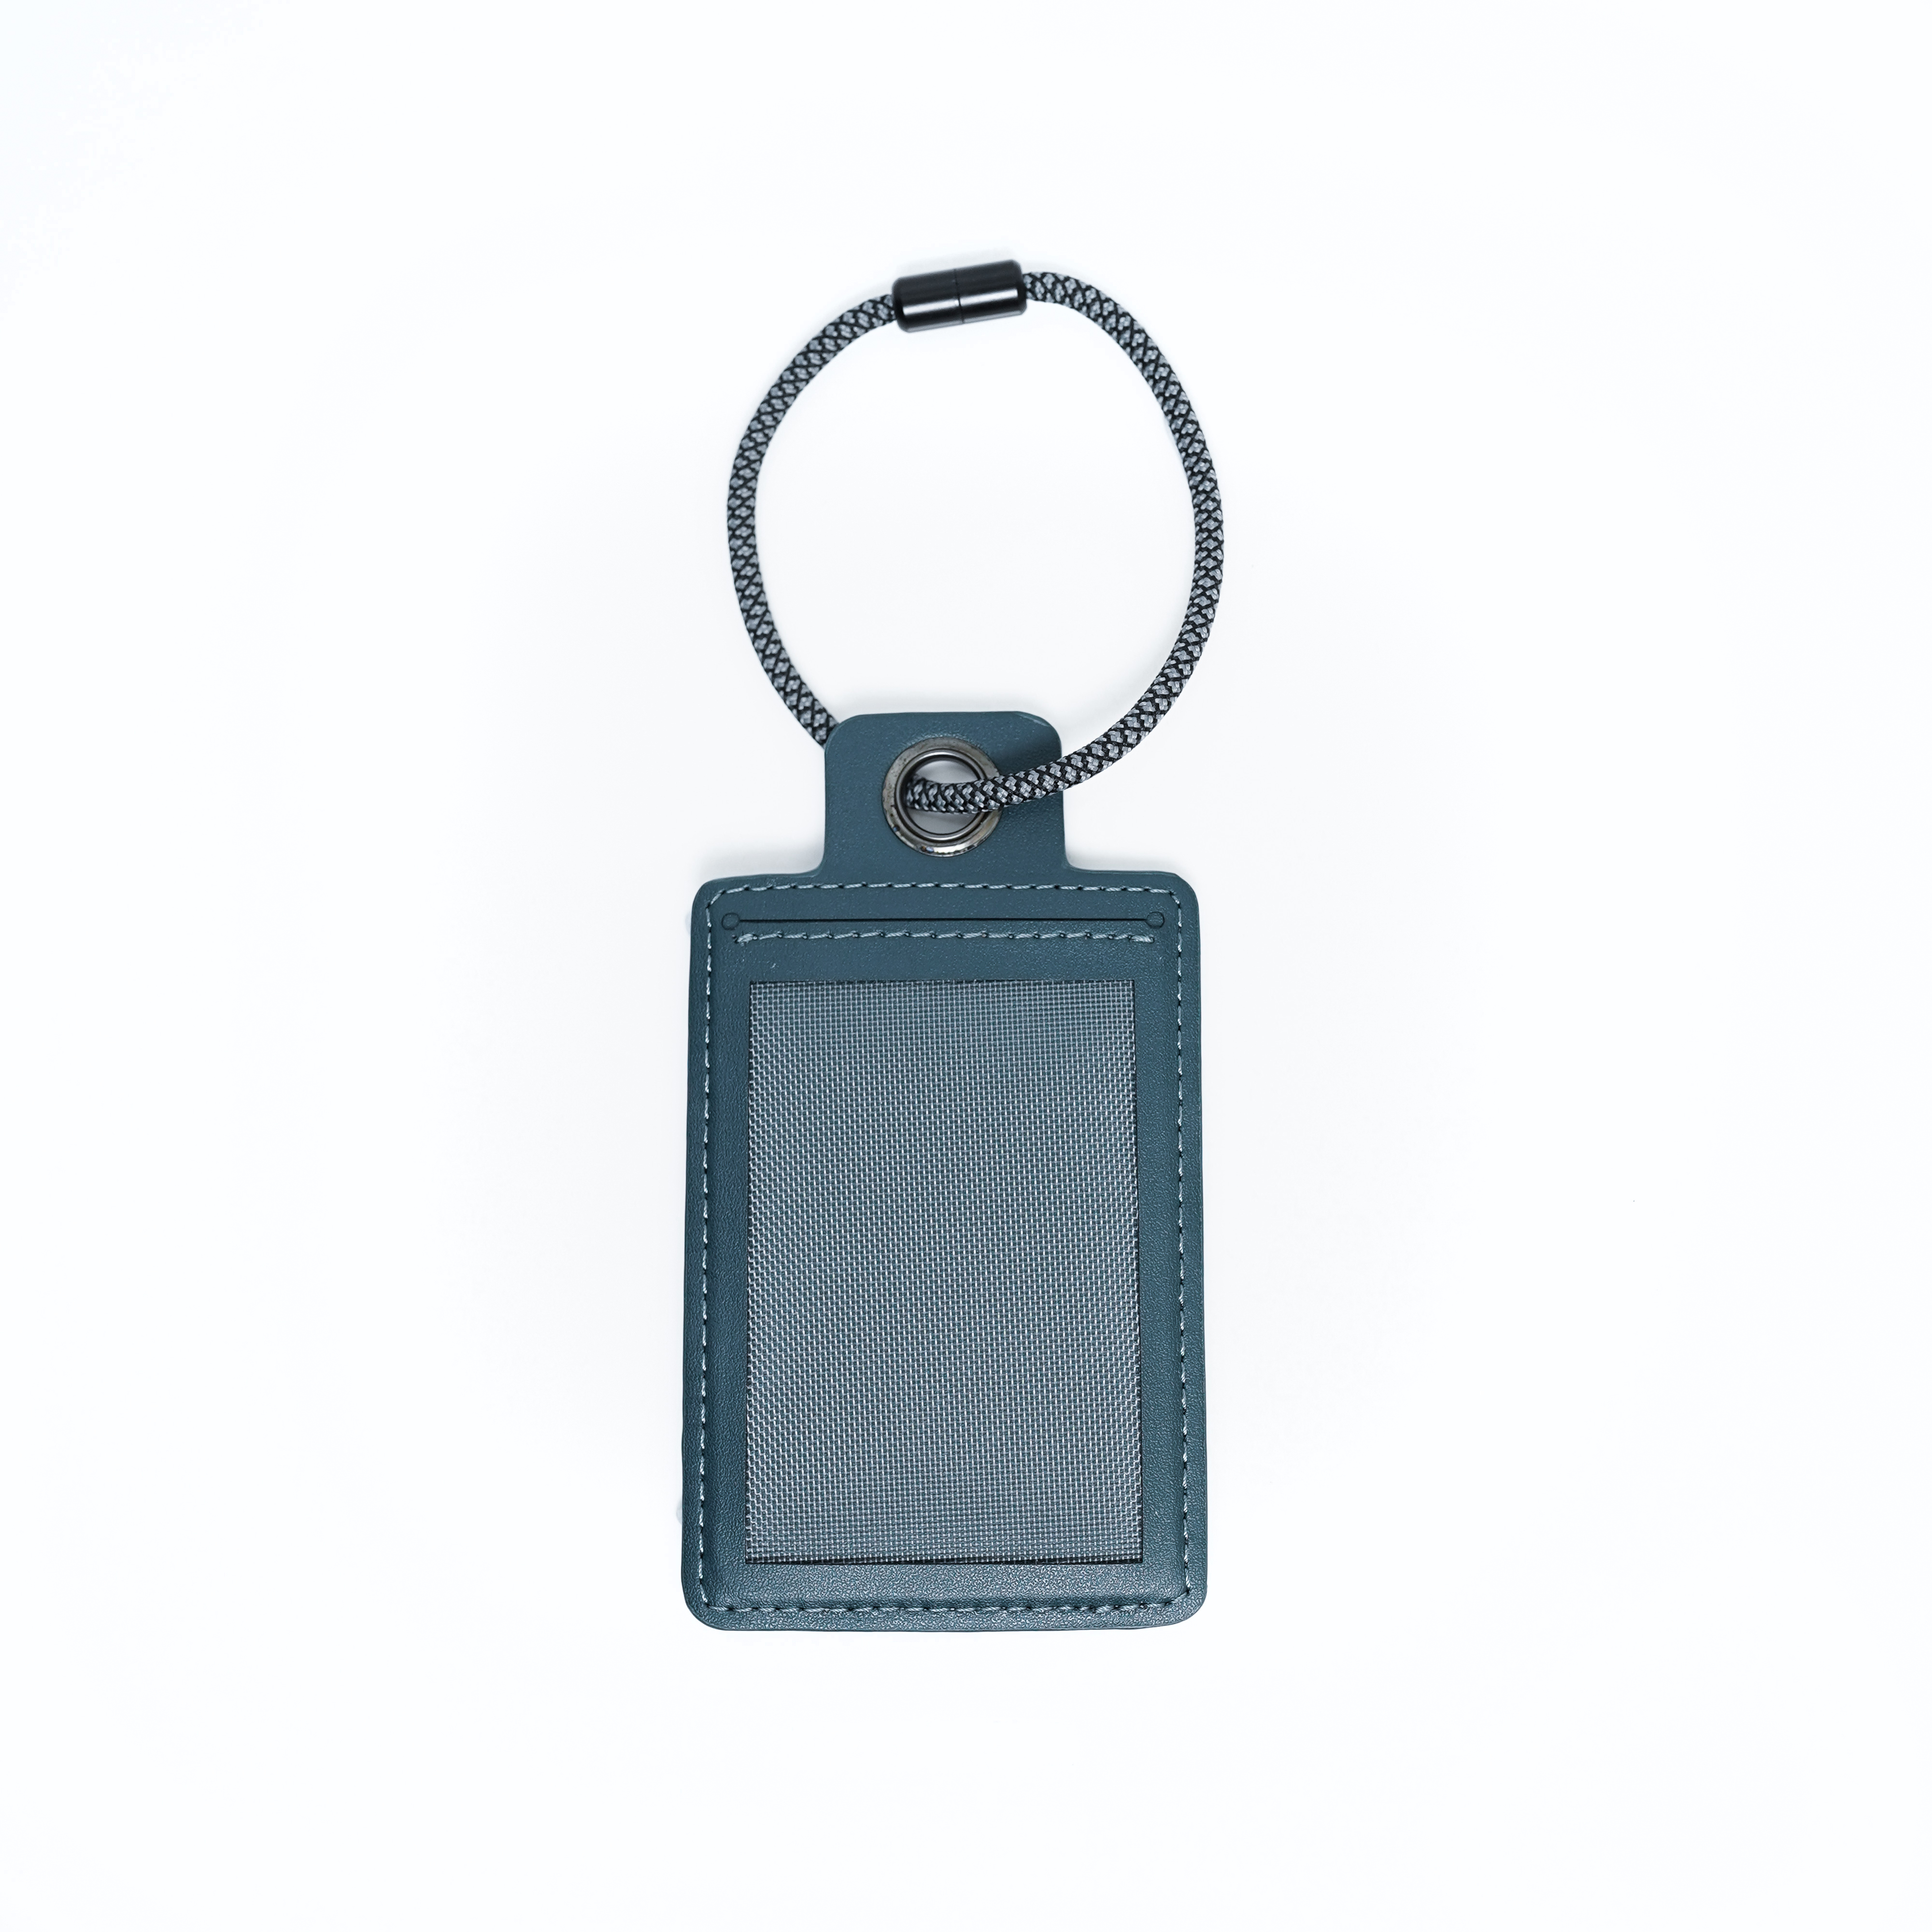 Monocozzi Exquisite Genuine Leather Keychain Holder for AirTag- Navy